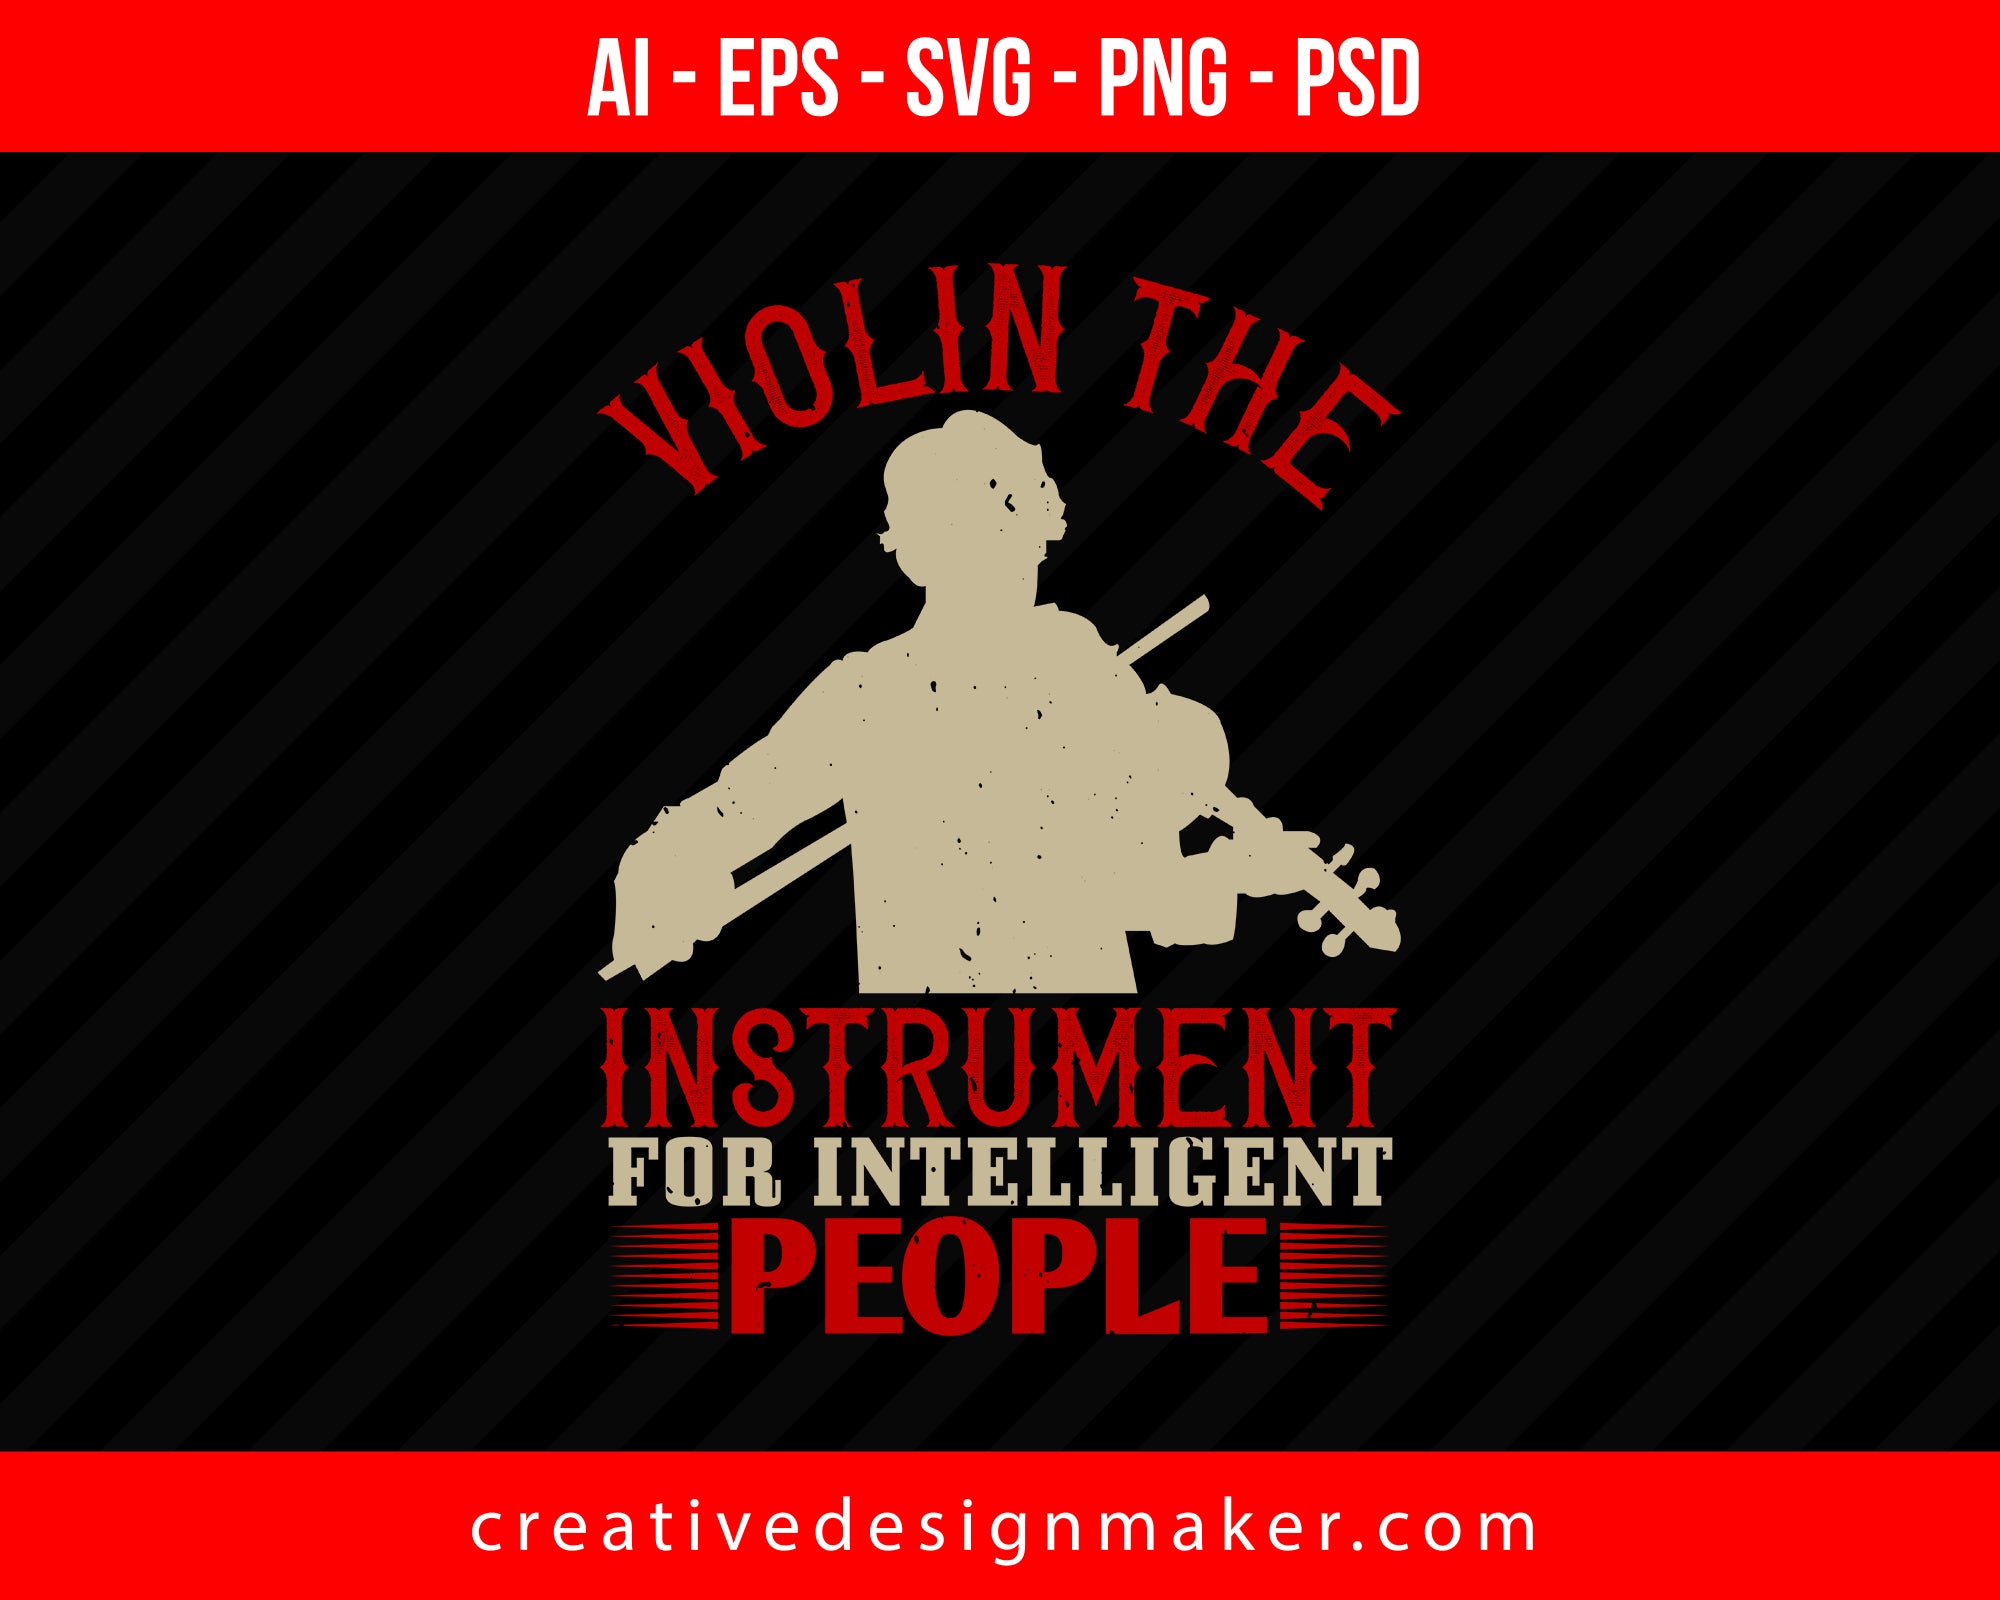 Violin the instrument for intelligent people Print Ready Editable T-Shirt SVG Design!